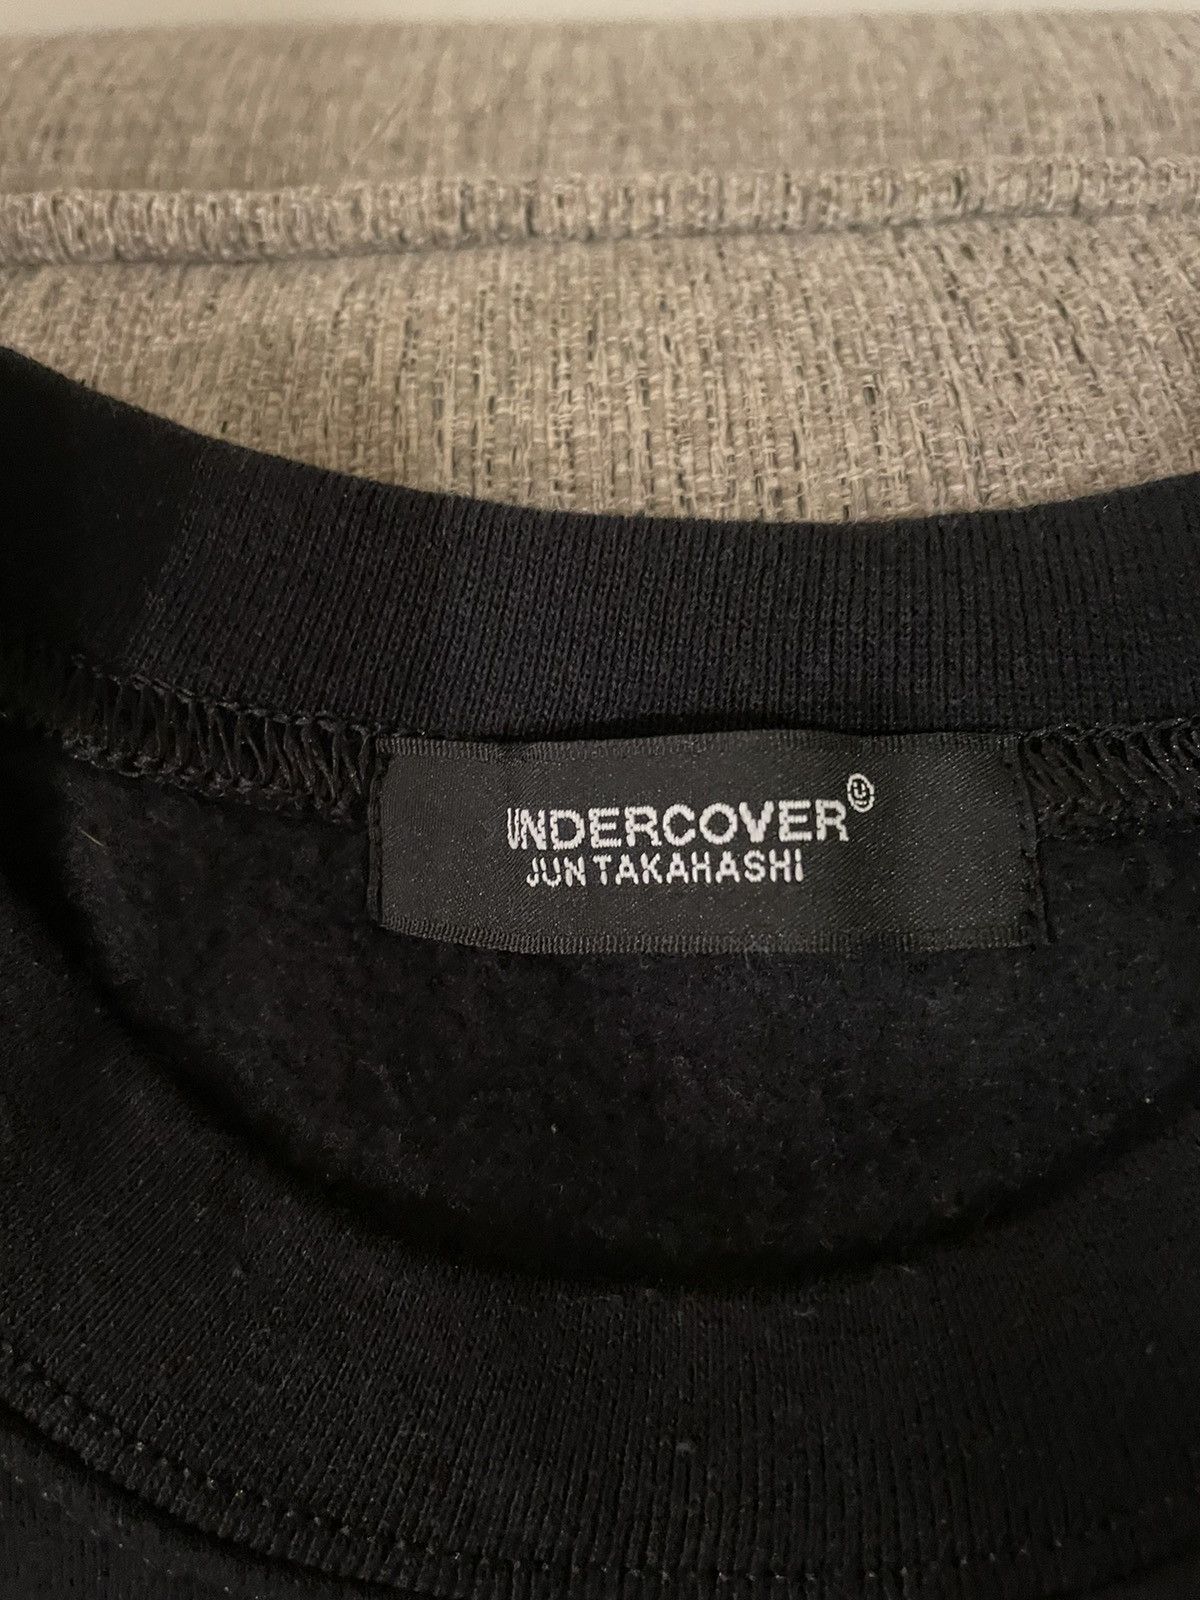 Undercover Undercover X Girls don’t cry Size US M / EU 48-50 / 2 - 5 Preview